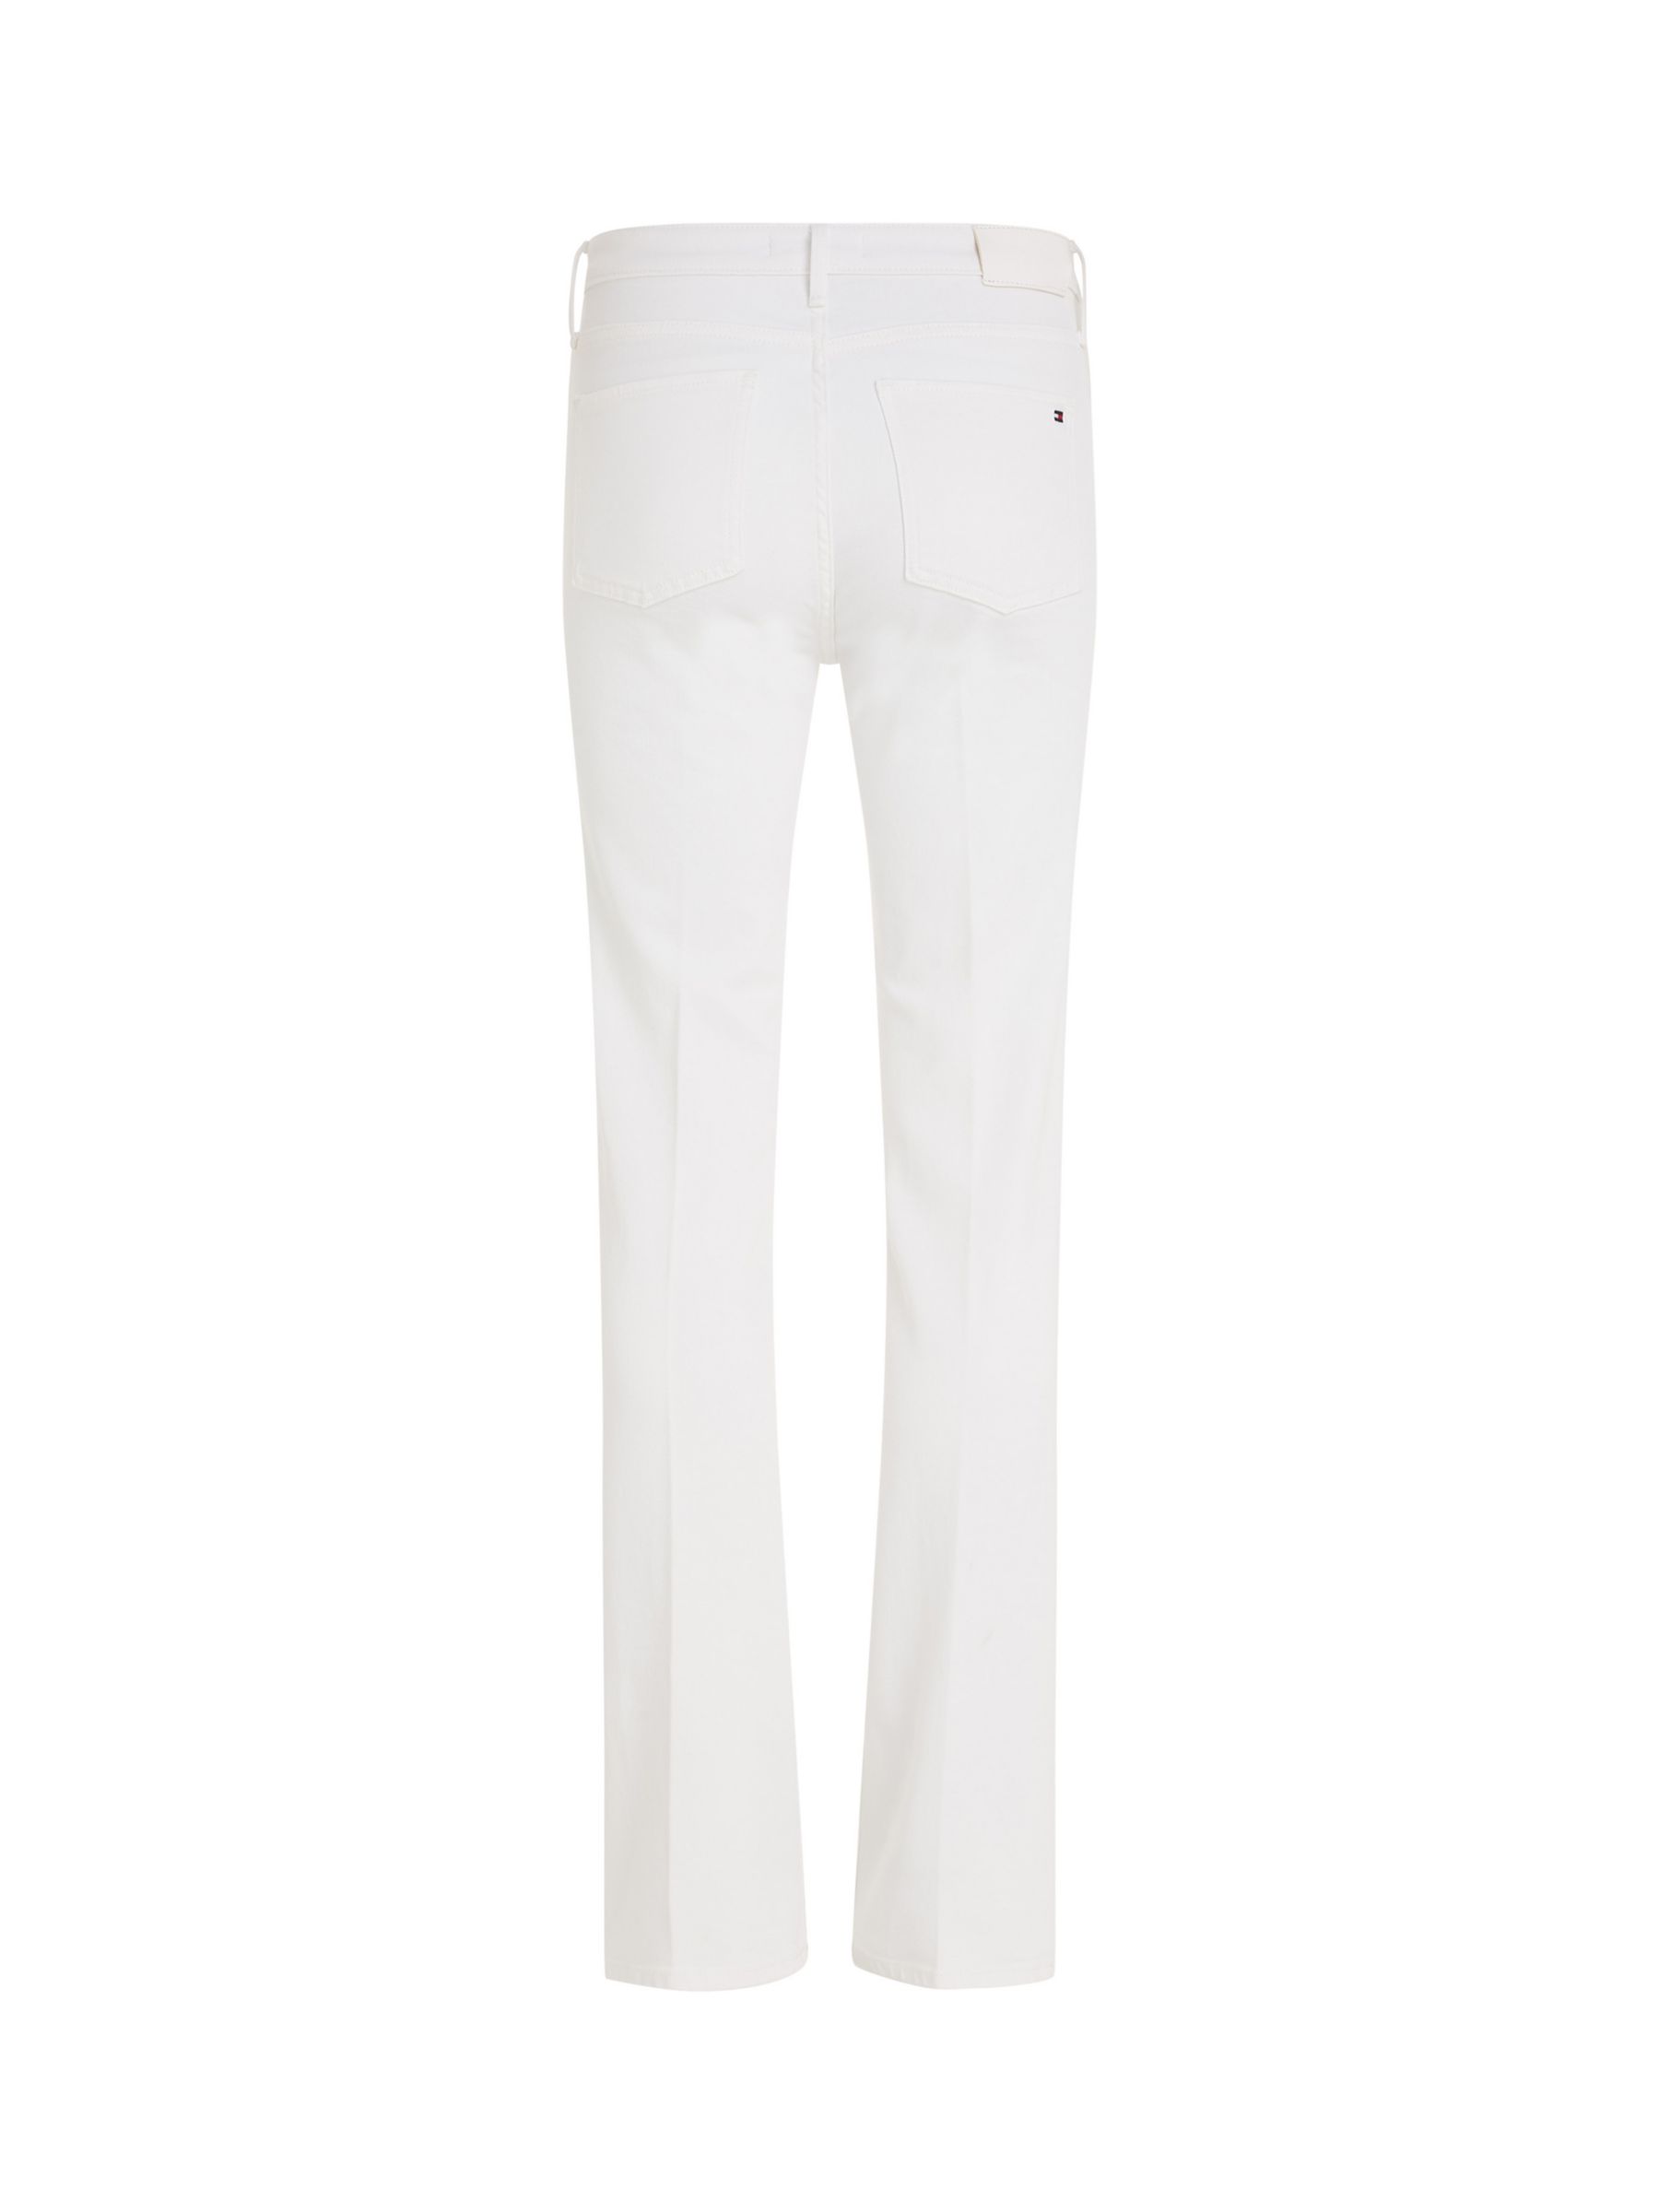 Tommy Hilfiger Bootcut Jeans, White, 25R